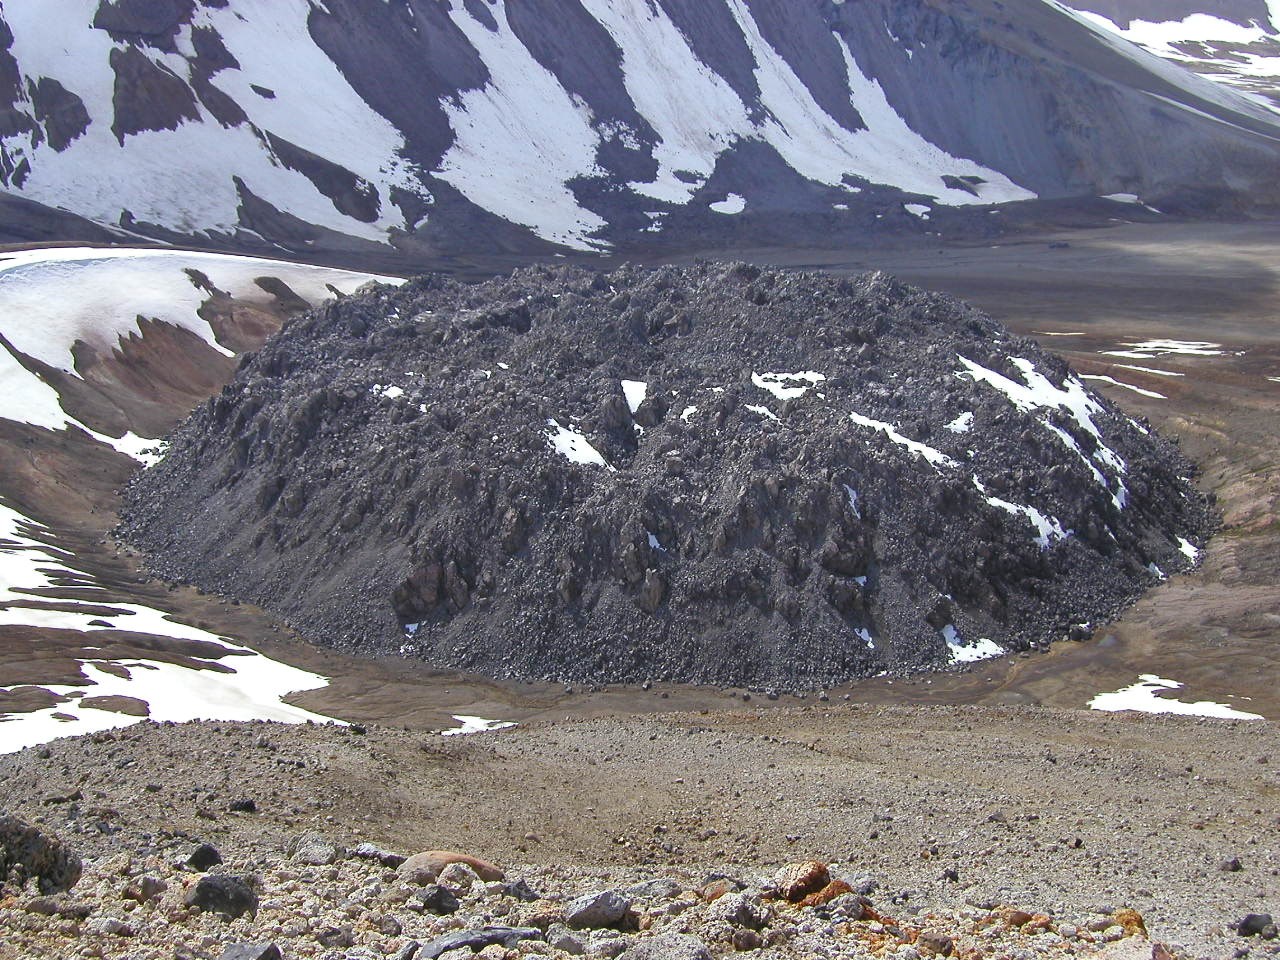 dome-shaped rock hill with partial snow cover on surrounding volcanic landscape